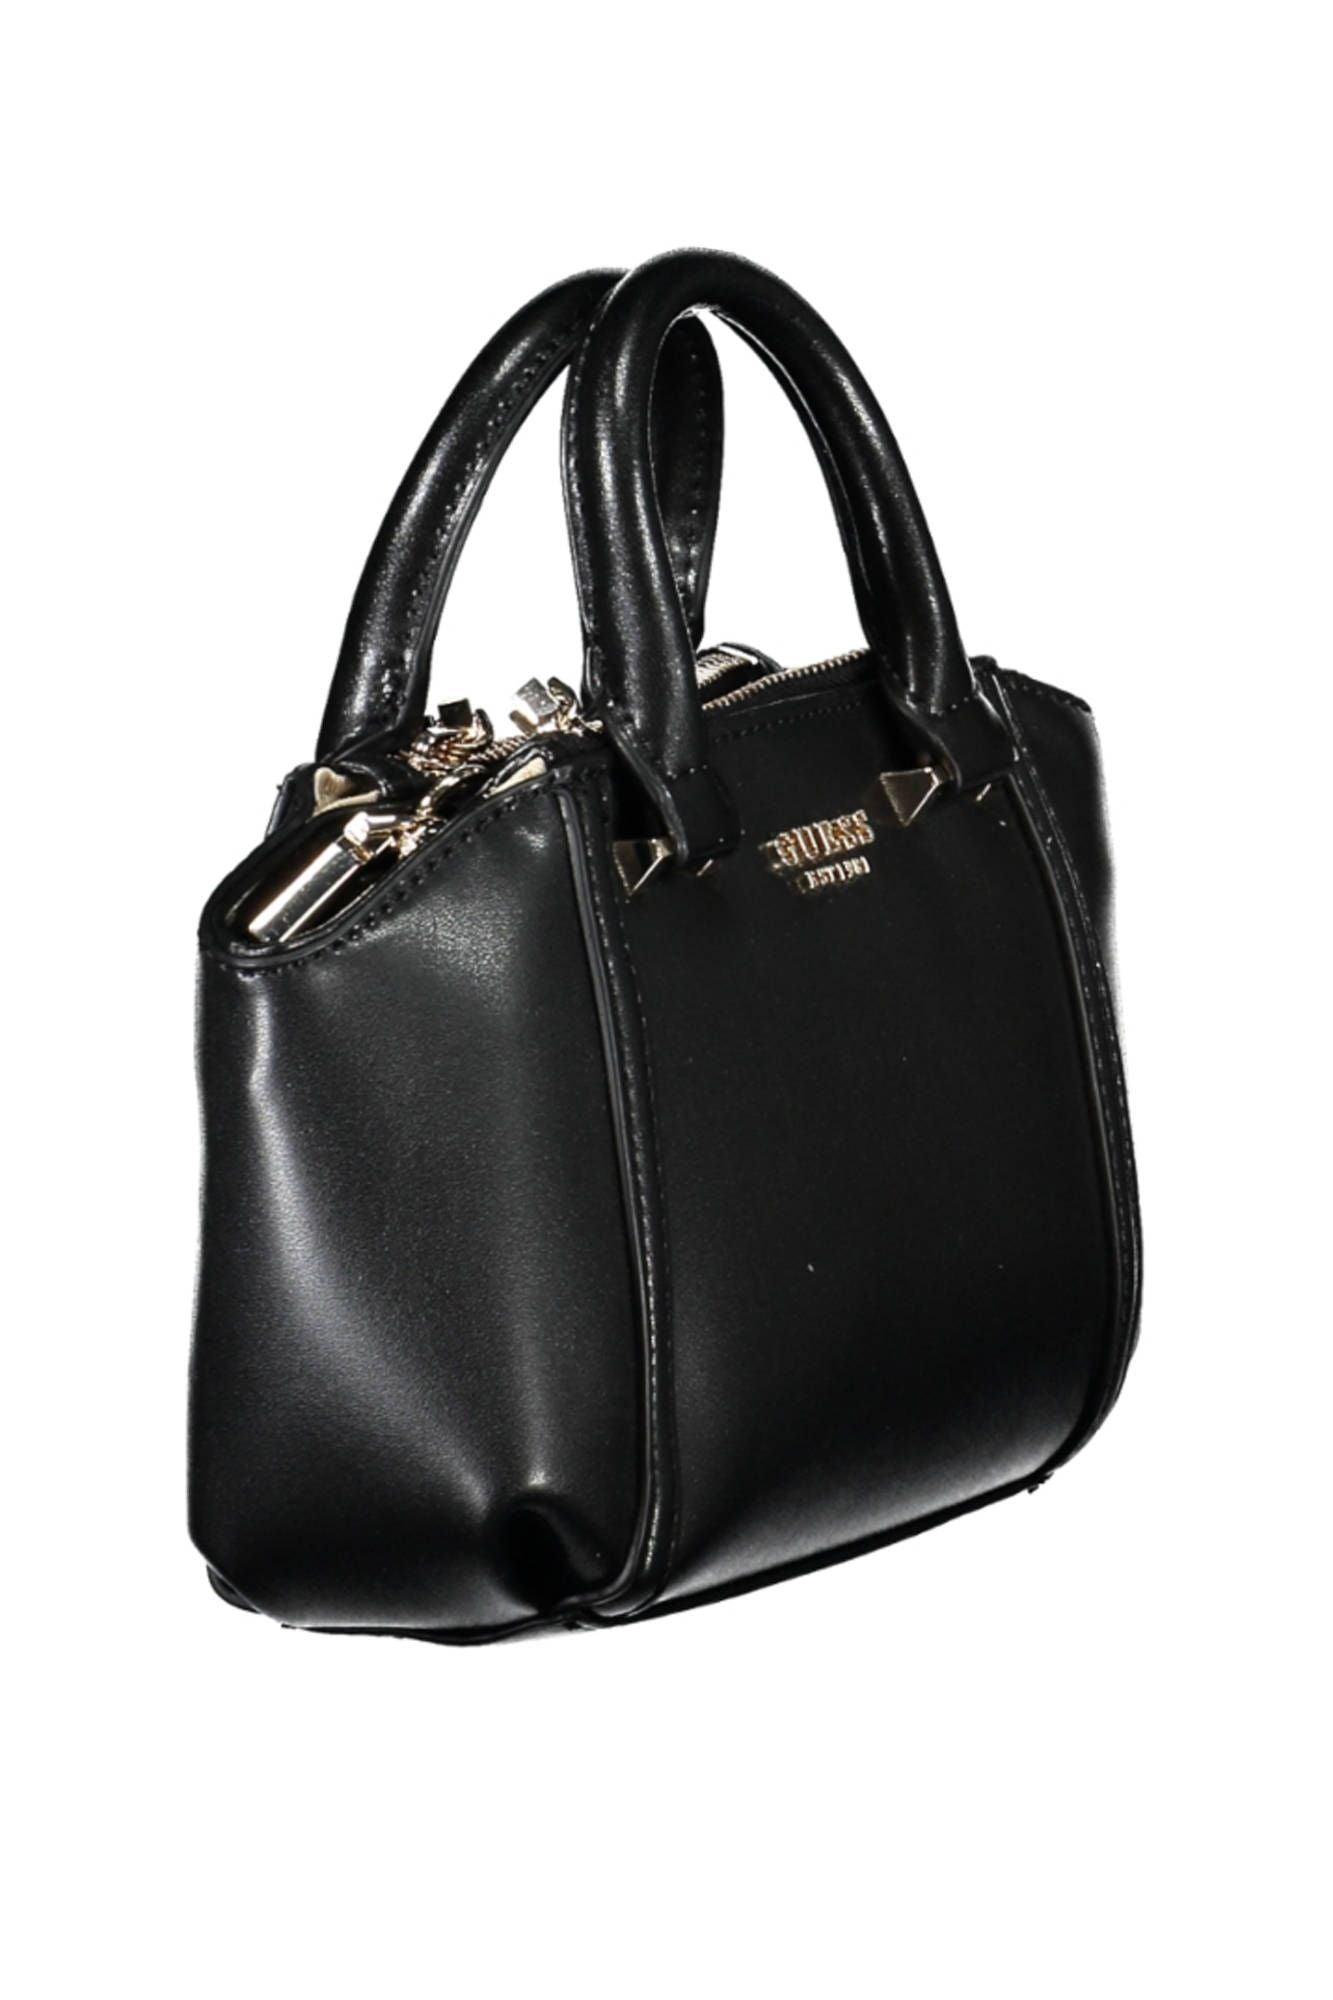 Guess Jeans Chic Black Contrasting Detail Tote Bag - PER.FASHION